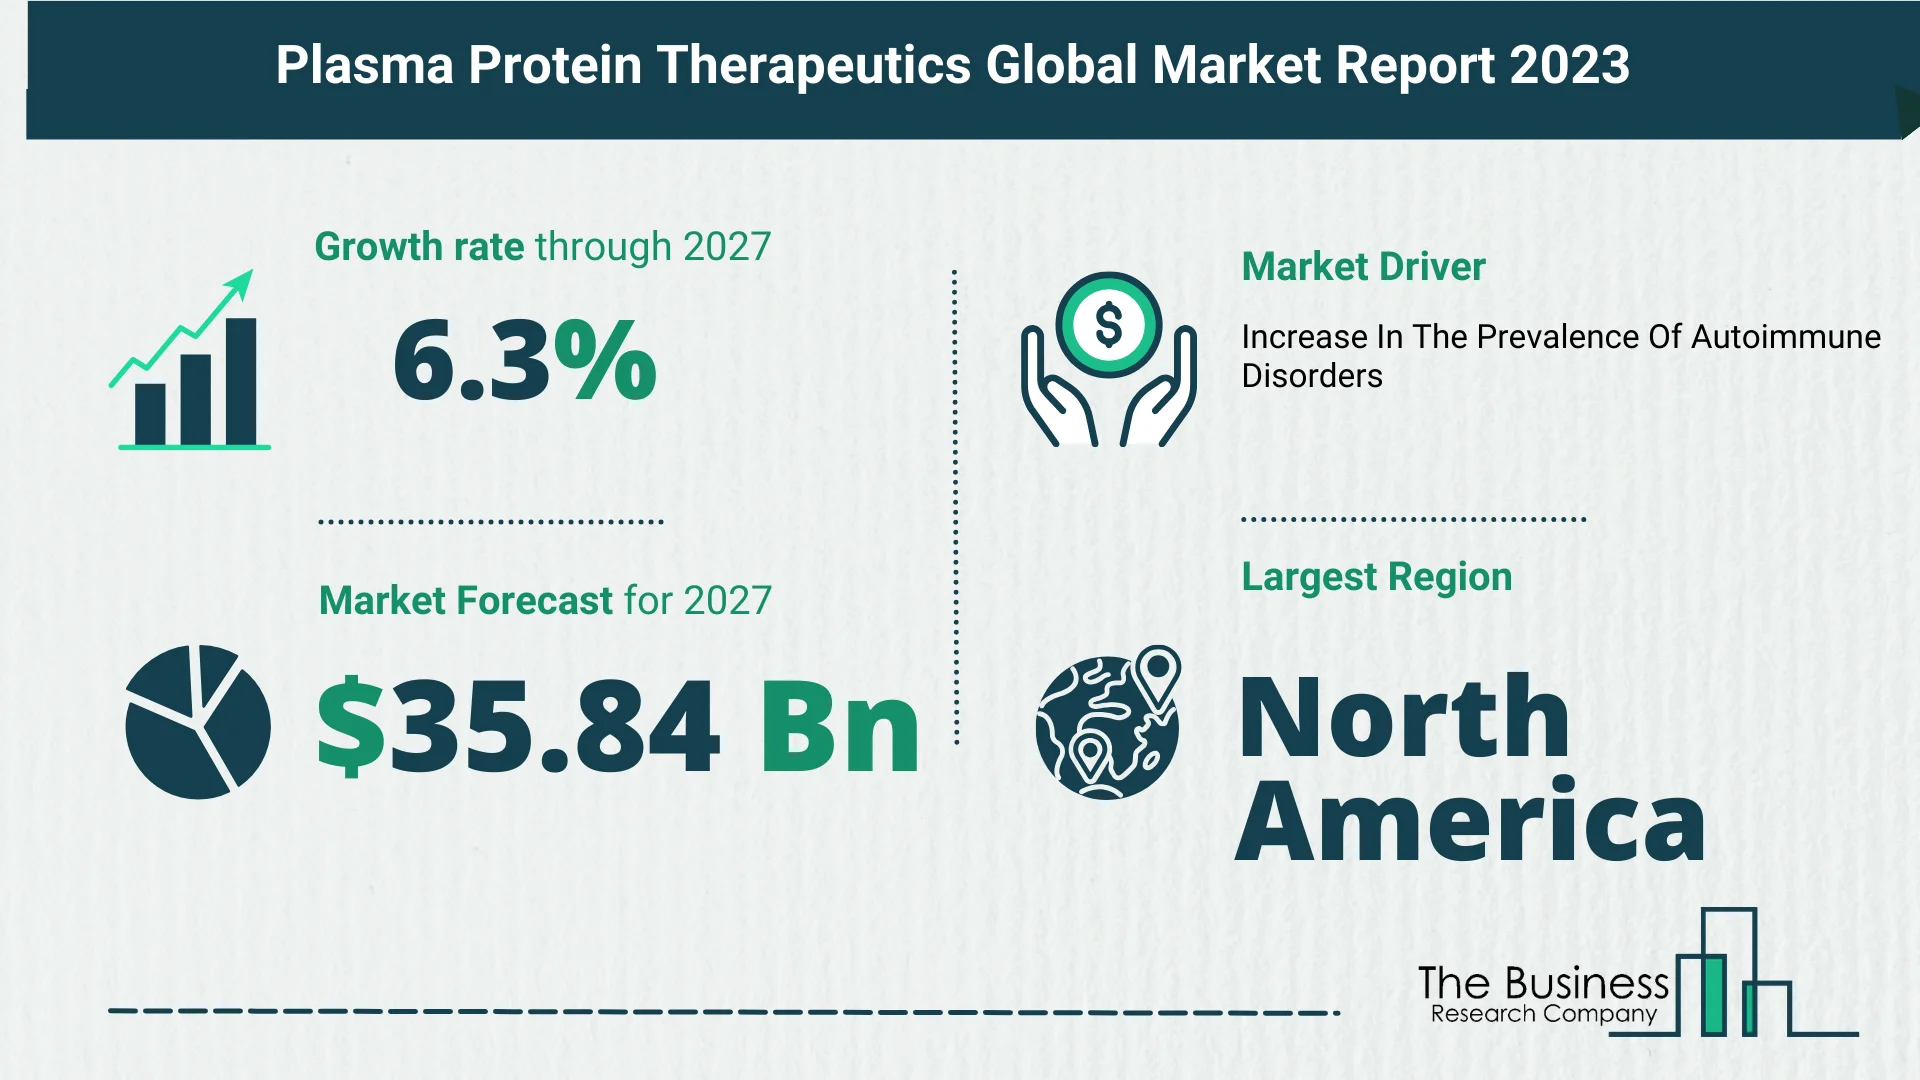 How Will The Plasma Protein Therapeutics Market Size Grow In The Coming Years?